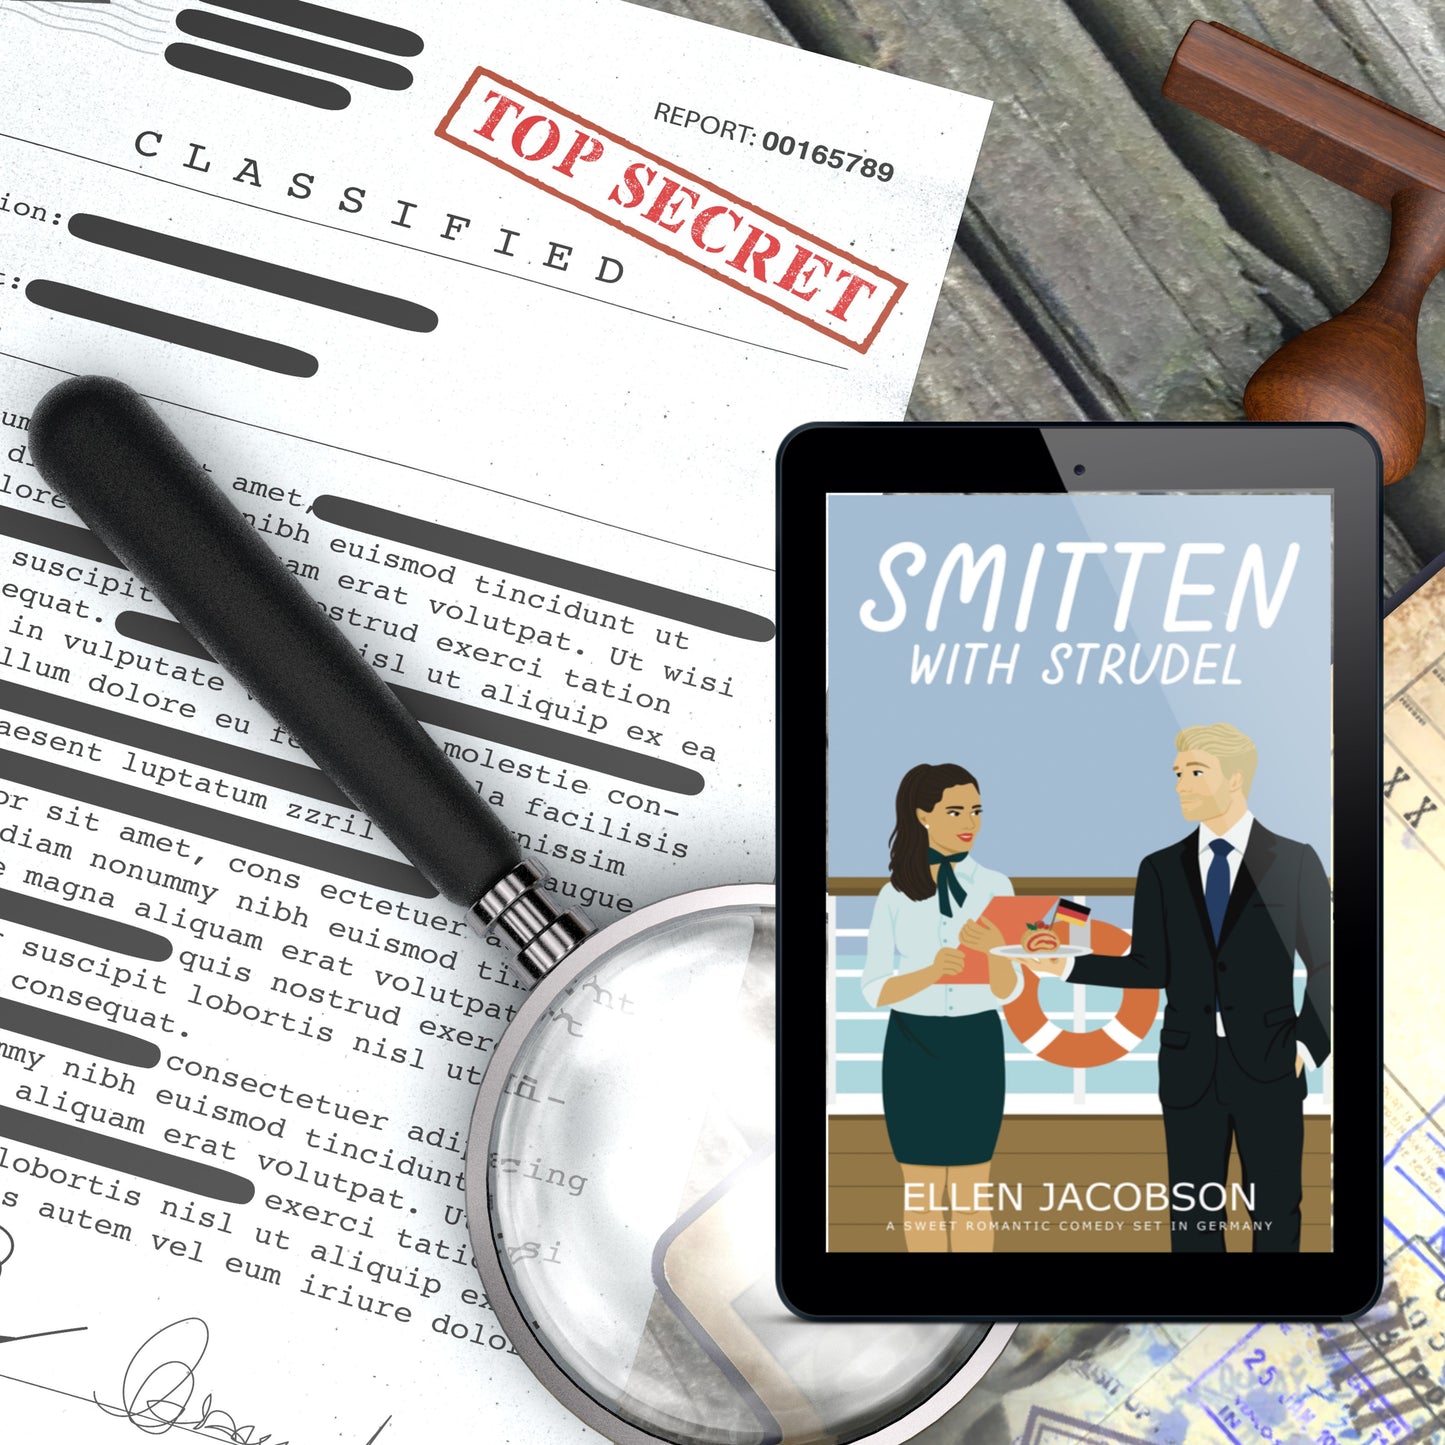 Smitten with Strudel romantic comedy ebook cover with top secret classified documents and magnifing glass